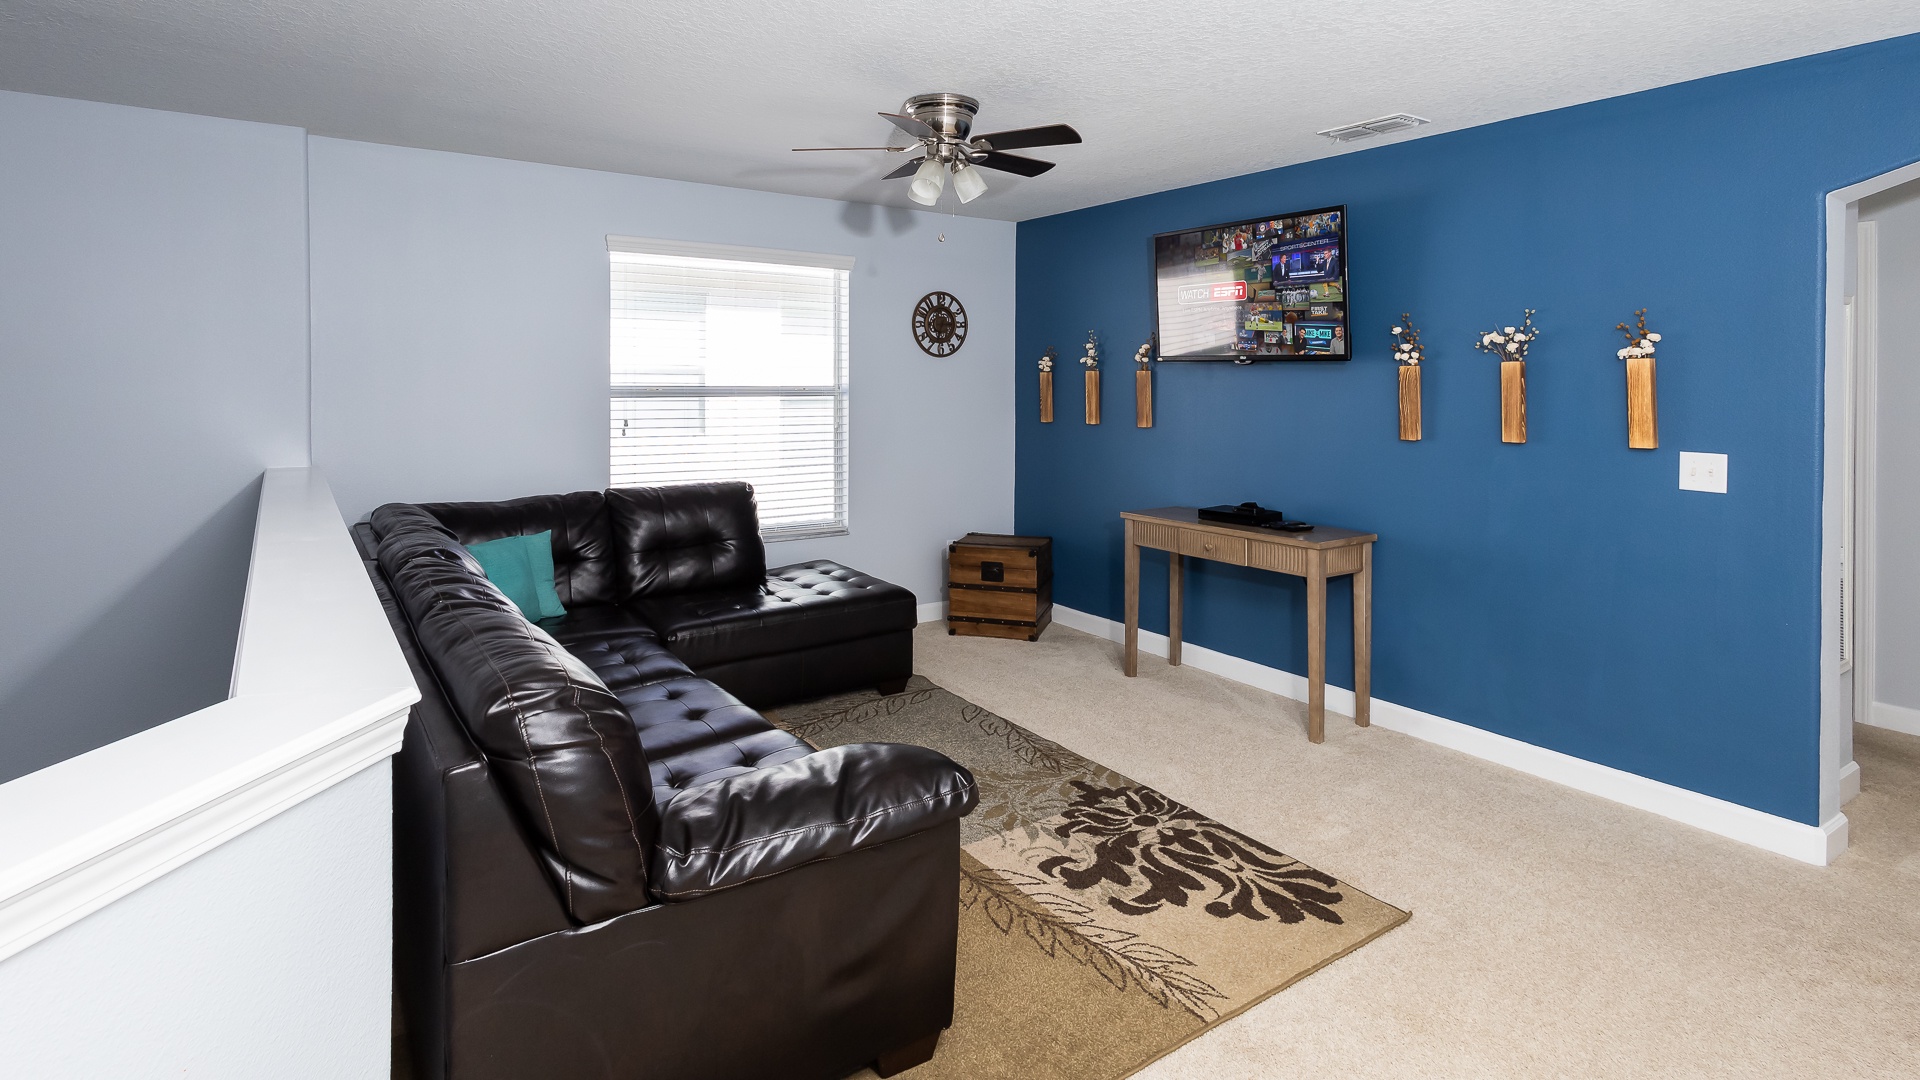 Sneak away from it all to enjoy your favorite entertainment in a separate TV/Game Area